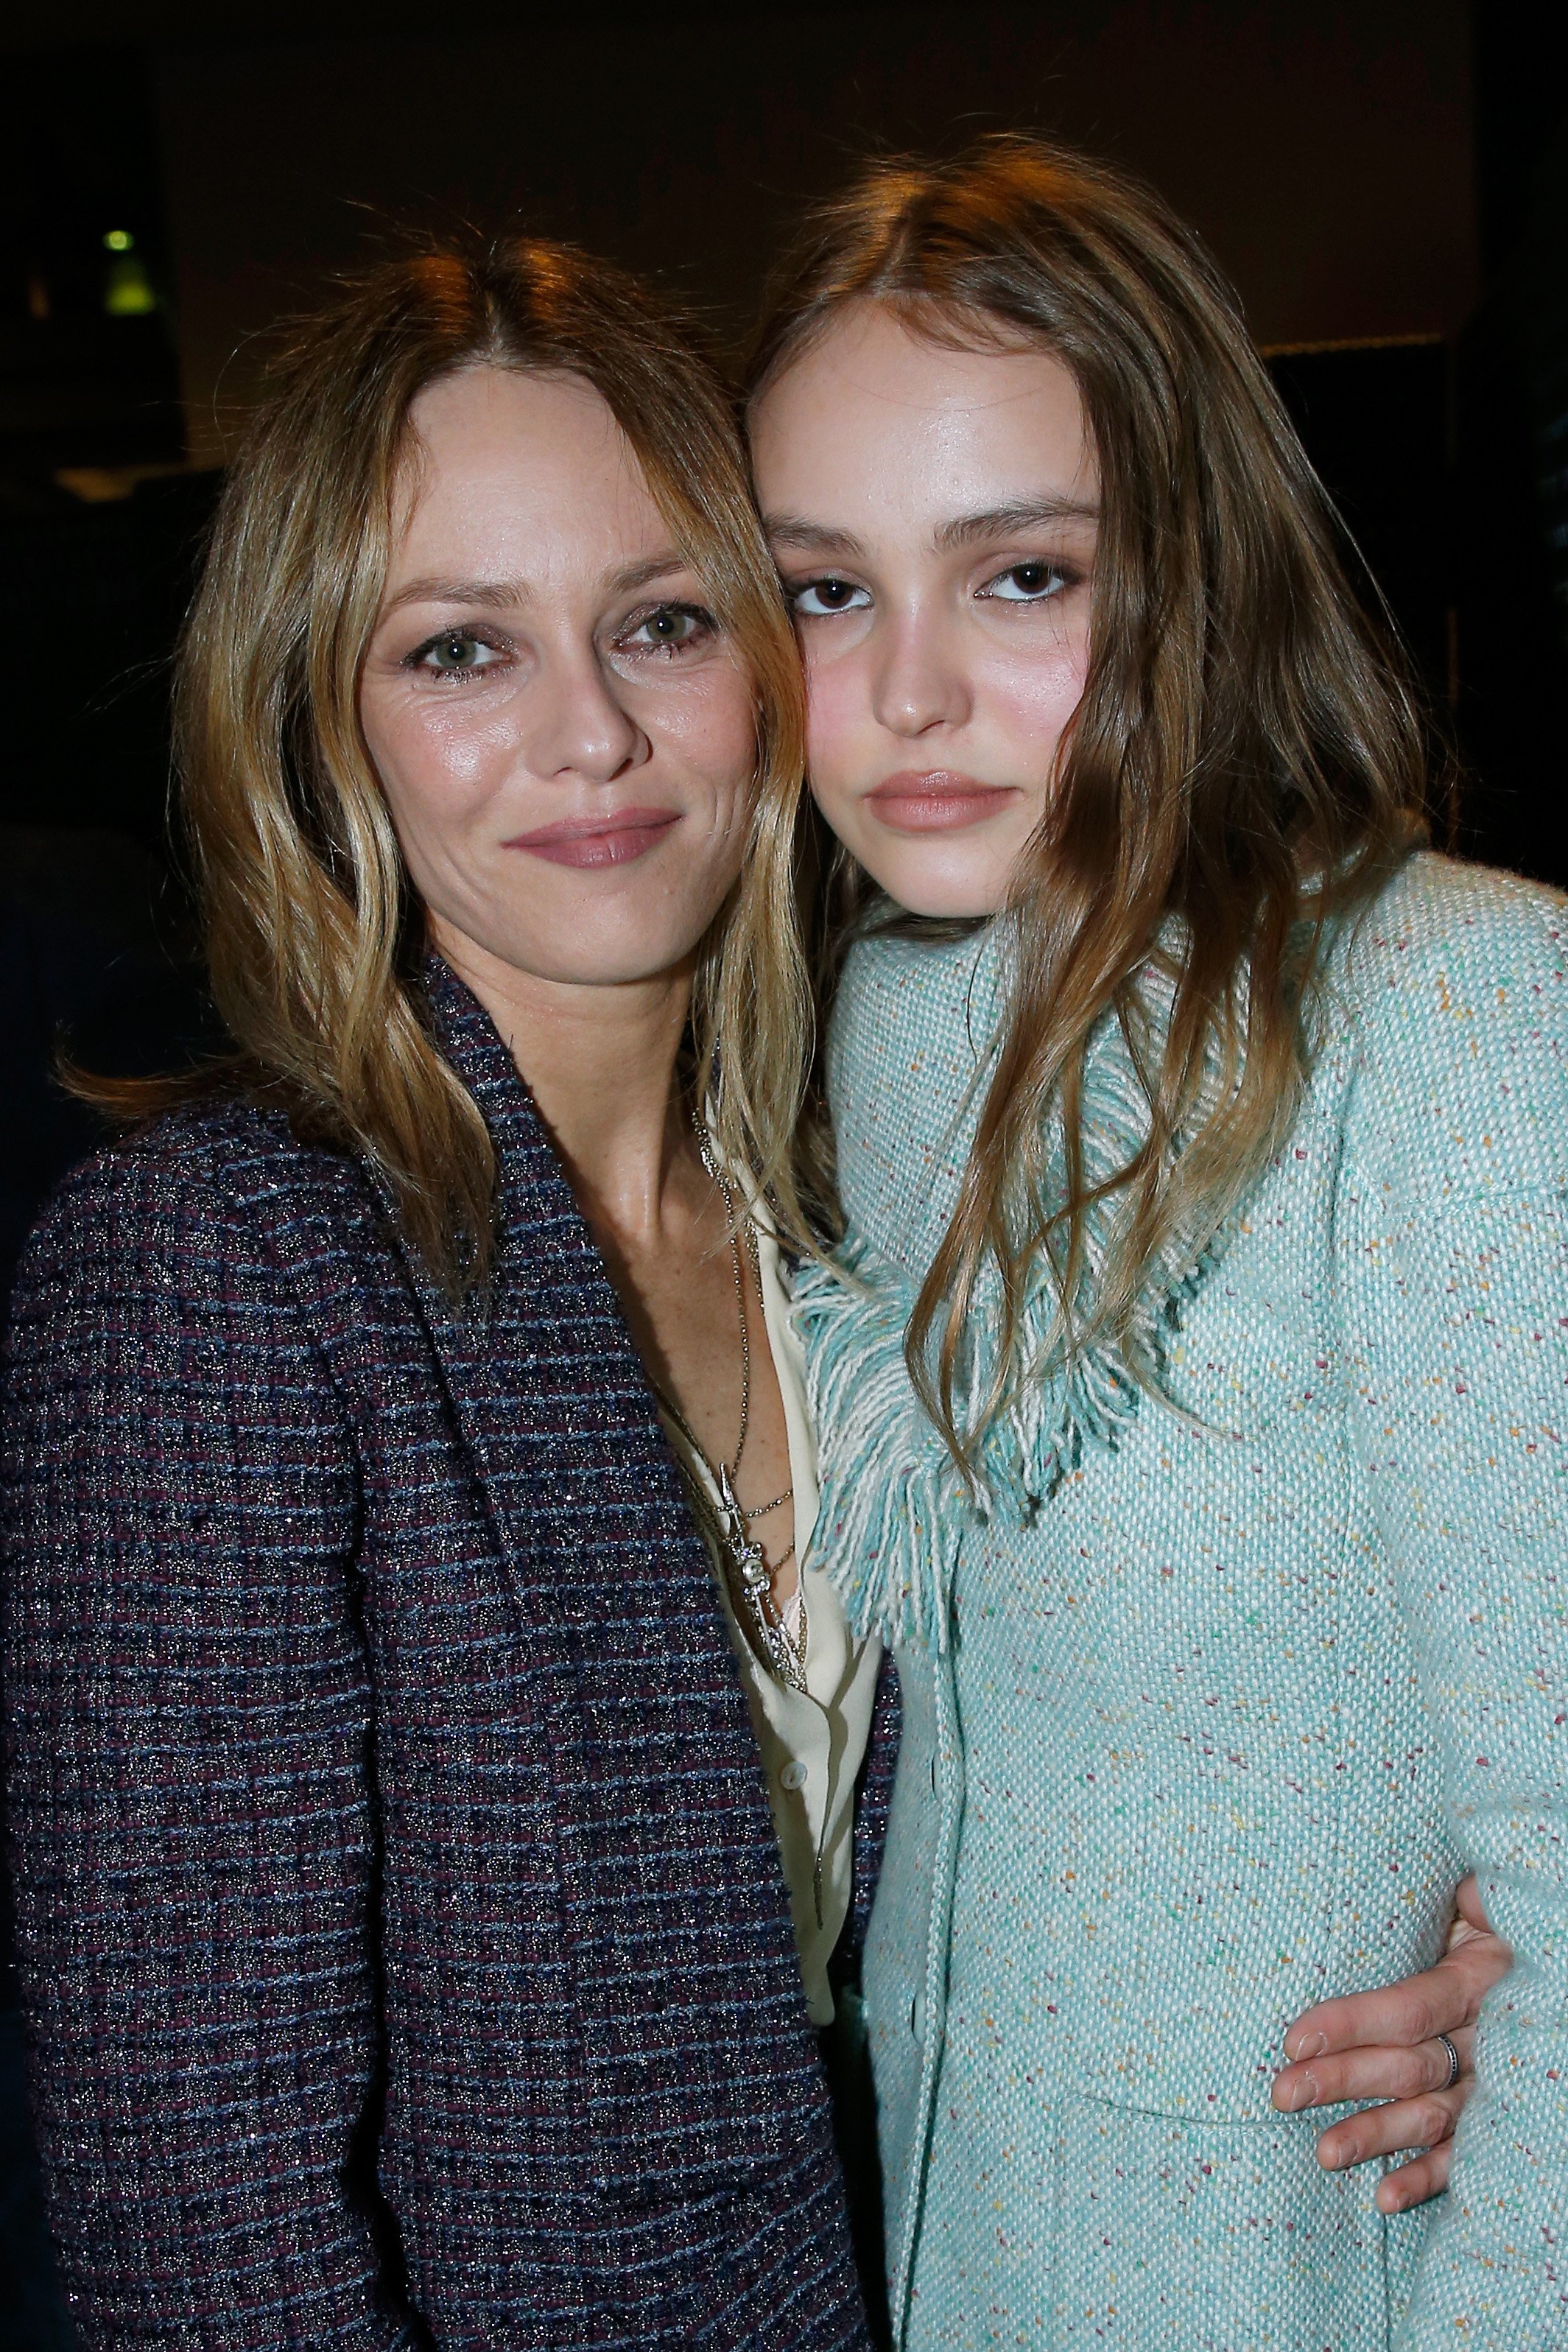 Vanessa Paradis and her daughter Lily-Rose Depp during the "Chien" Paris premiere at Mk2 Bibliotheque on March 5, 2018 in Paris, France. / Source: Getty Images